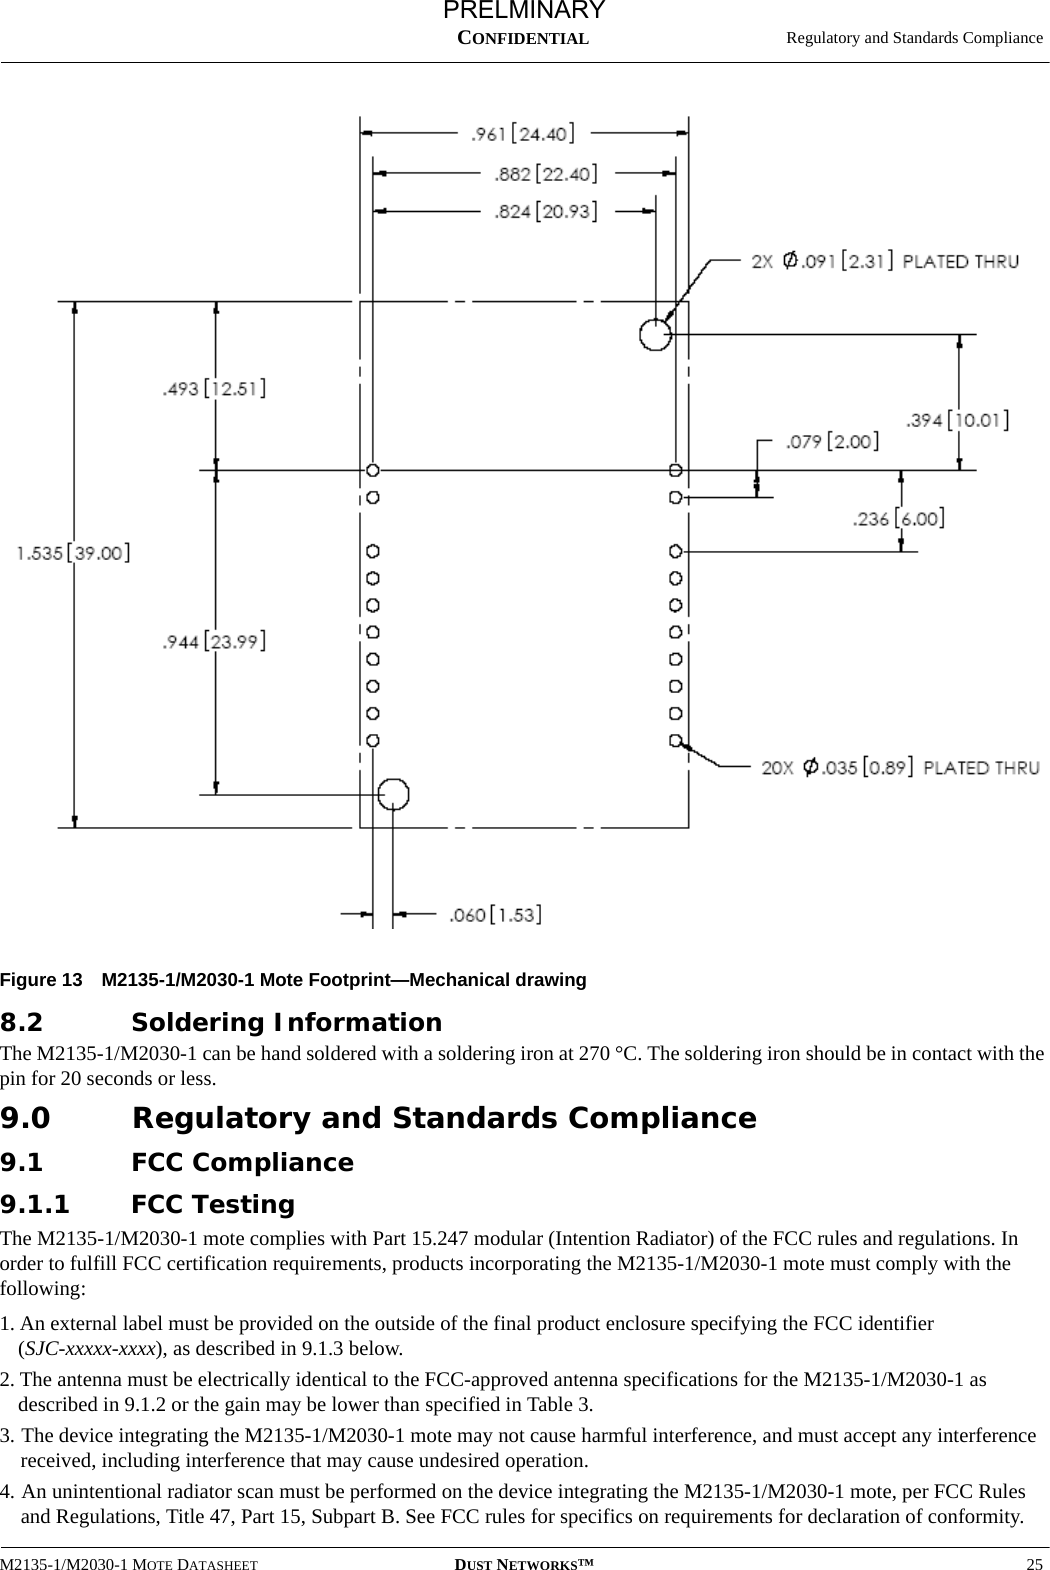   Regulatory and Standards ComplianceM2135-1/M2030-1 MOTE DATASHEET DUST NETWORKS™25CONFIDENTIALFigure 13 M2135-1/M2030-1 Mote Footprint—Mechanical drawing8.2 Soldering InformationThe M2135-1/M2030-1 can be hand soldered with a soldering iron at 270 °C. The soldering iron should be in contact with the pin for 20 seconds or less.9.0 Regulatory and Standards Compliance9.1 FCC Compliance9.1.1 FCC TestingThe M2135-1/M2030-1 mote complies with Part 15.247 modular (Intention Radiator) of the FCC rules and regulations. In order to fulfill FCC certification requirements, products incorporating the M2135-1/M2030-1 mote must comply with the following:1. An external label must be provided on the outside of the final product enclosure specifying the FCC identifier  (SJC-xxxxx-xxxx), as described in 9.1.3 below.2. The antenna must be electrically identical to the FCC-approved antenna specifications for the M2135-1/M2030-1 as described in 9.1.2 or the gain may be lower than specified in Table 3.3. The device integrating the M2135-1/M2030-1 mote may not cause harmful interference, and must accept any interference received, including interference that may cause undesired operation.4. An unintentional radiator scan must be performed on the device integrating the M2135-1/M2030-1 mote, per FCC Rules and Regulations, Title 47, Part 15, Subpart B. See FCC rules for specifics on requirements for declaration of conformity.PRELMINARY